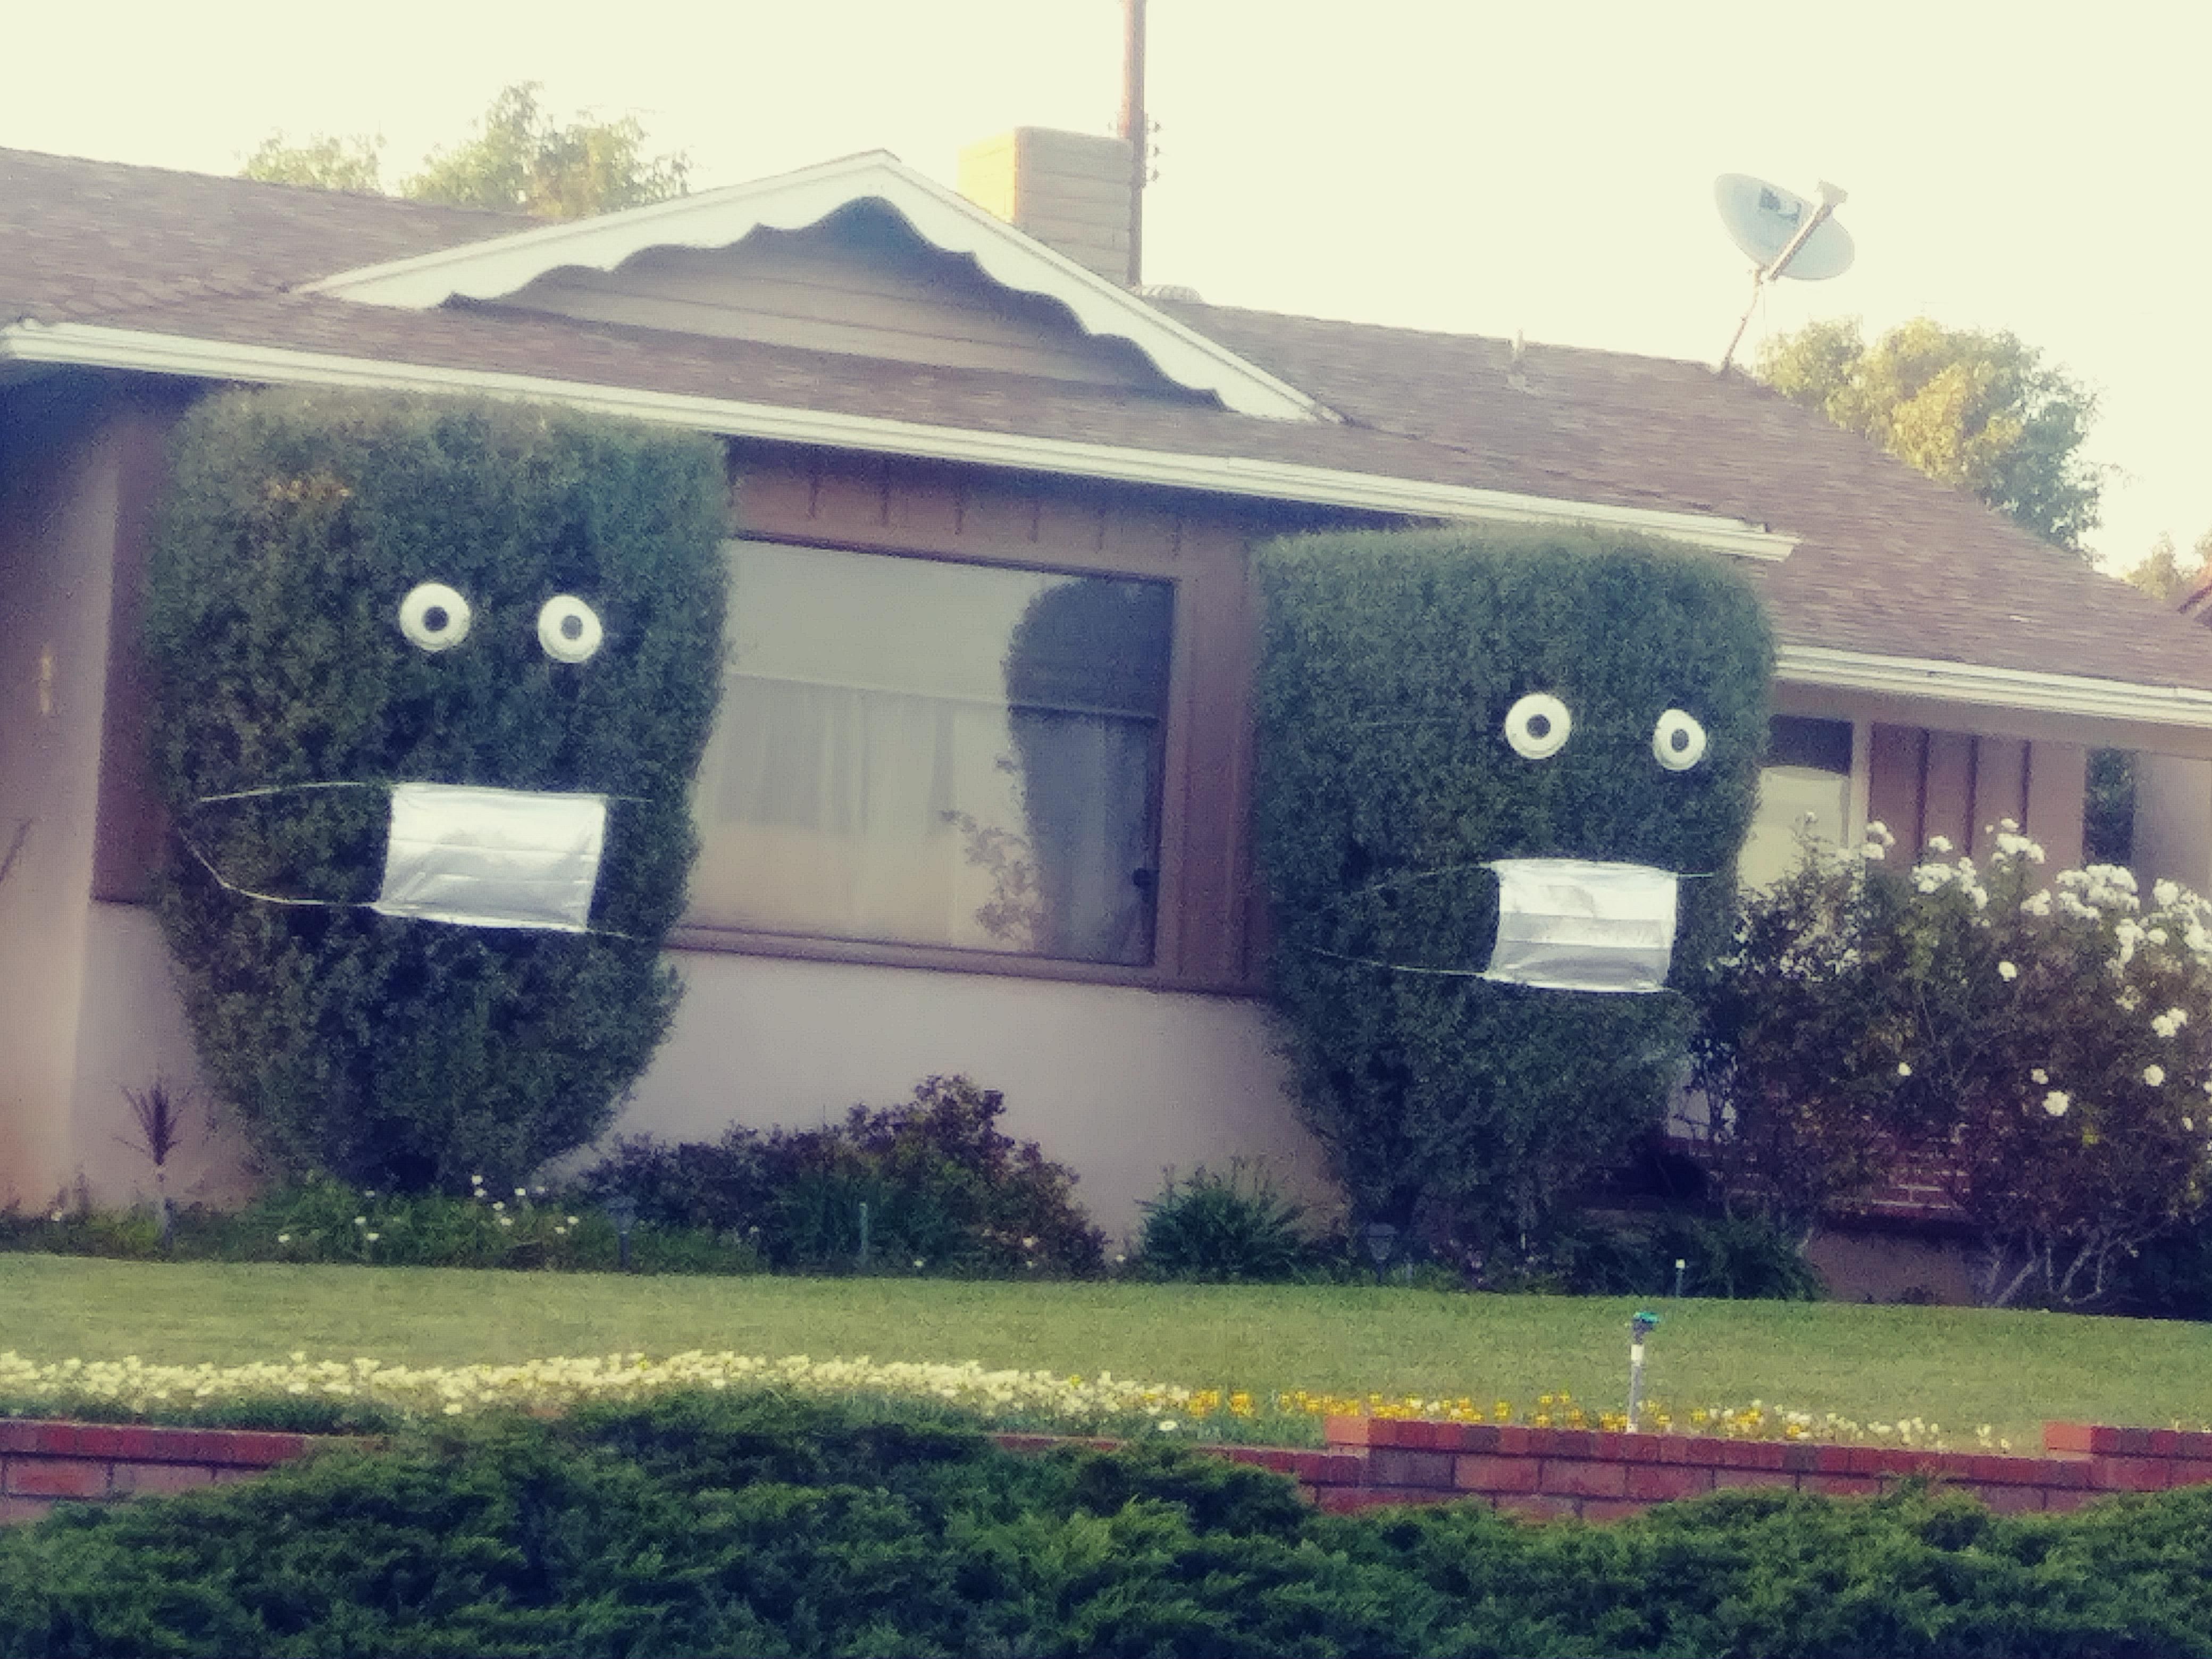 A house down the street from where I live.